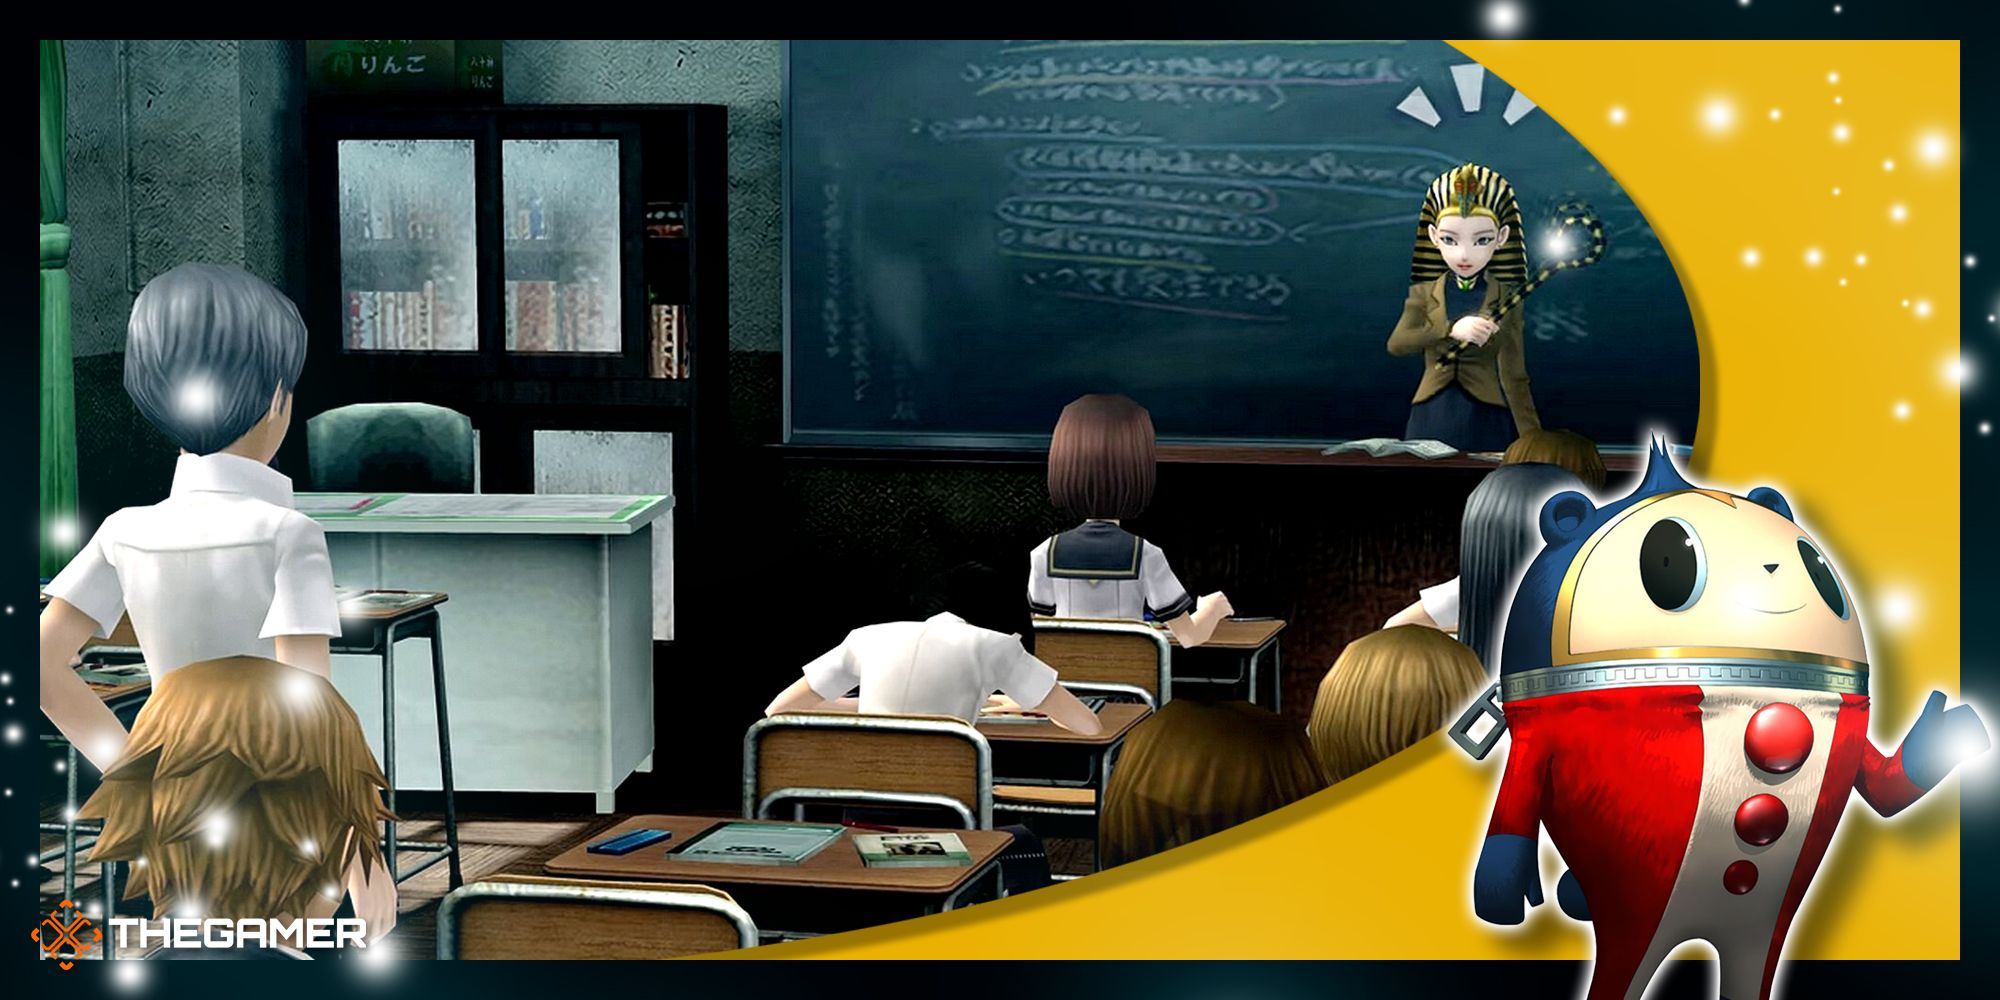 Persona 4 Golden - Yu standing up in class to answer a question with a Teddie overlay in the corner.